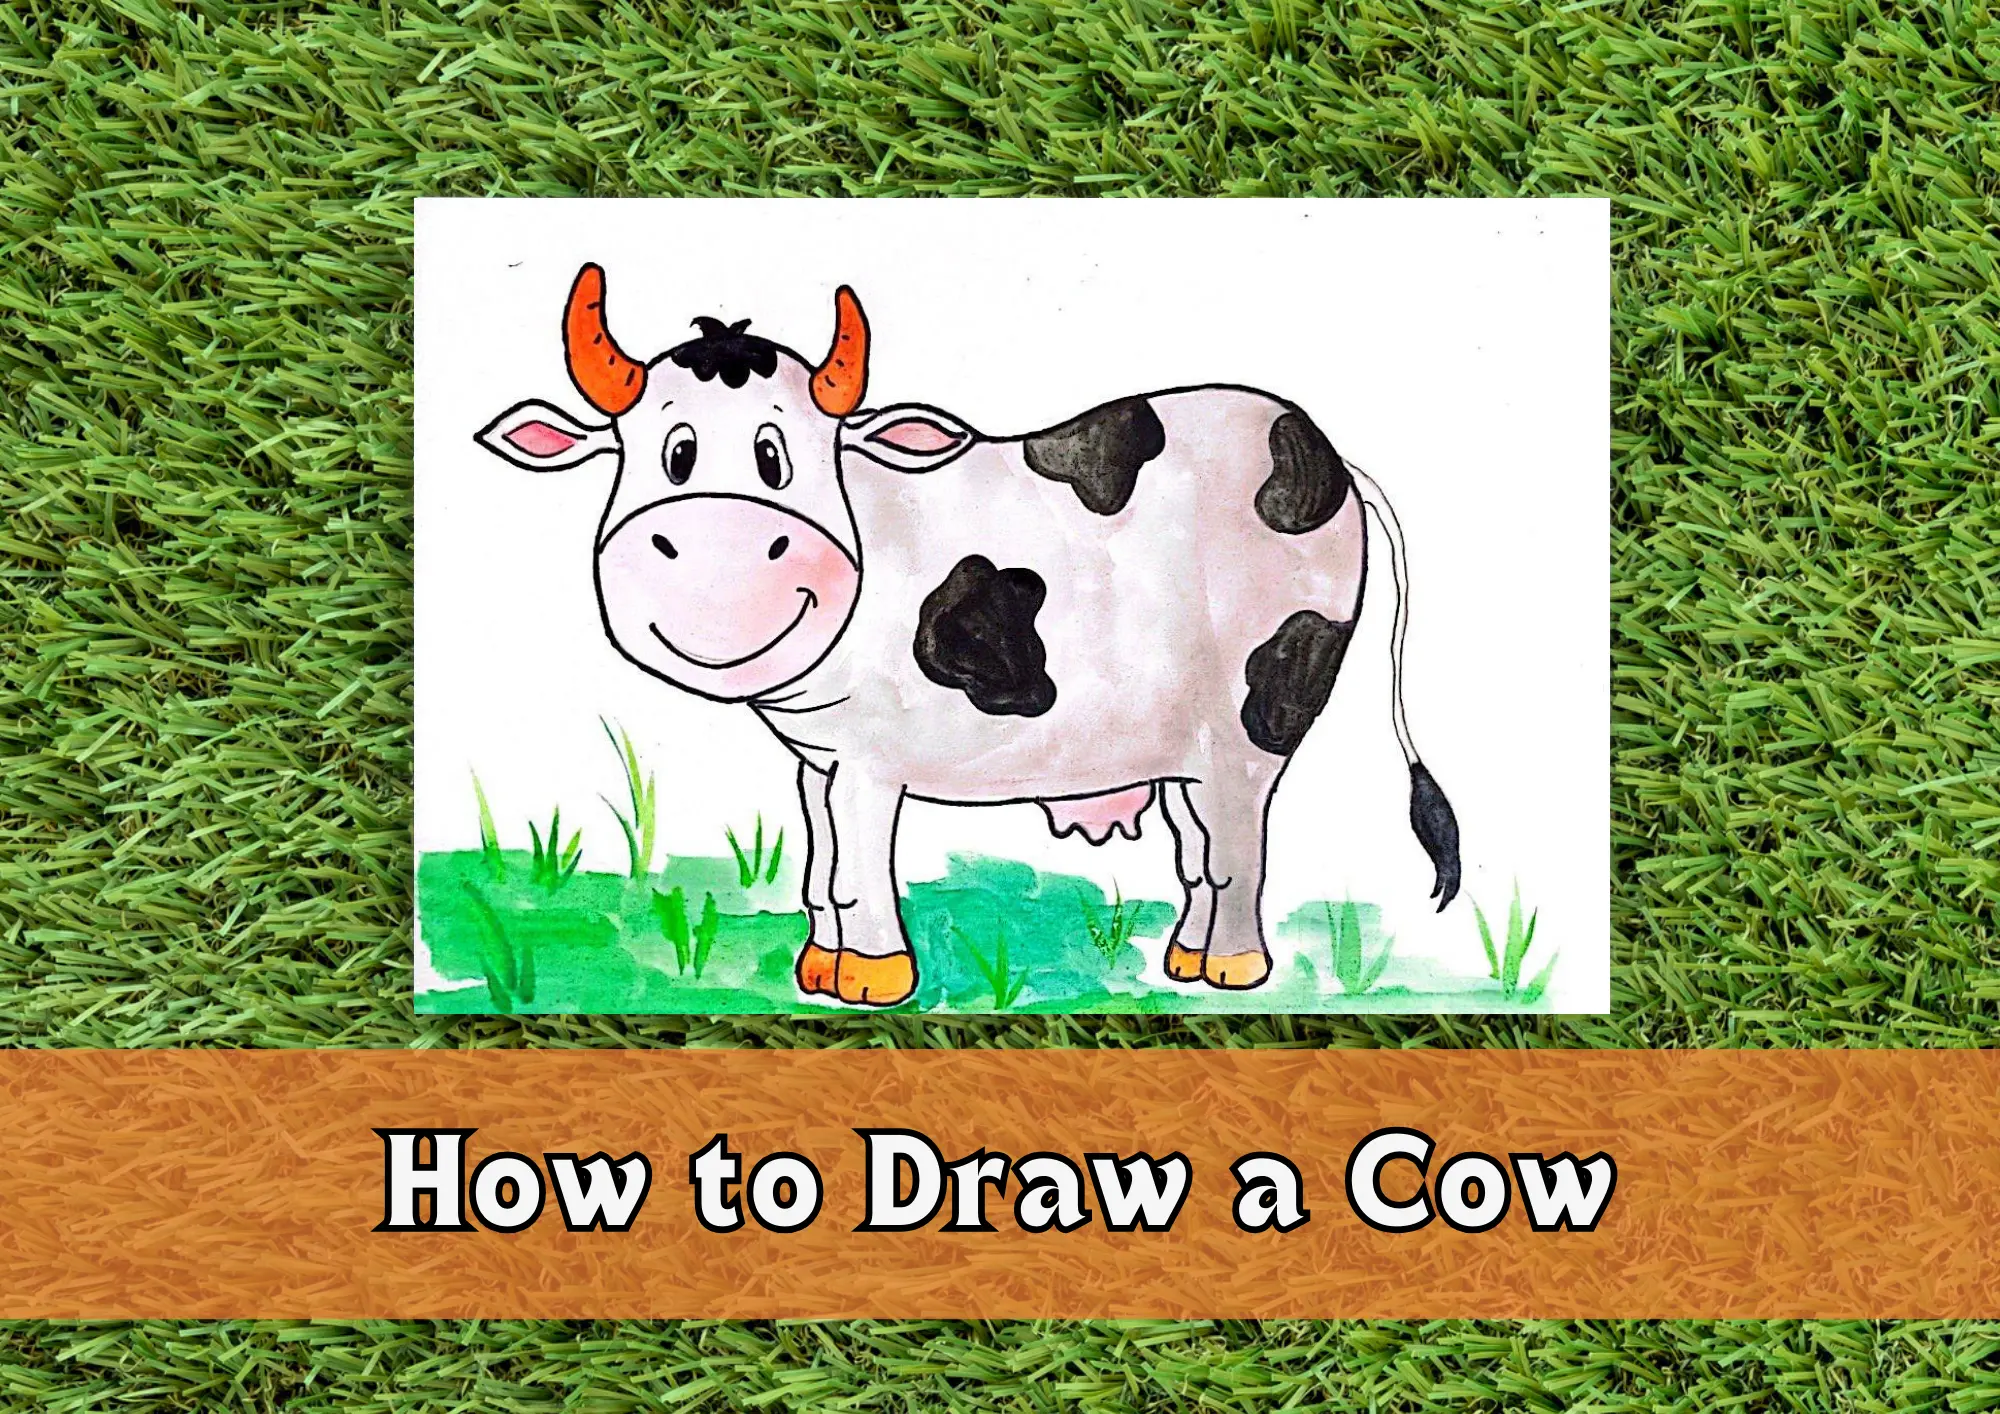 How to Draw a Cow - Easy Cute Cartoon Style